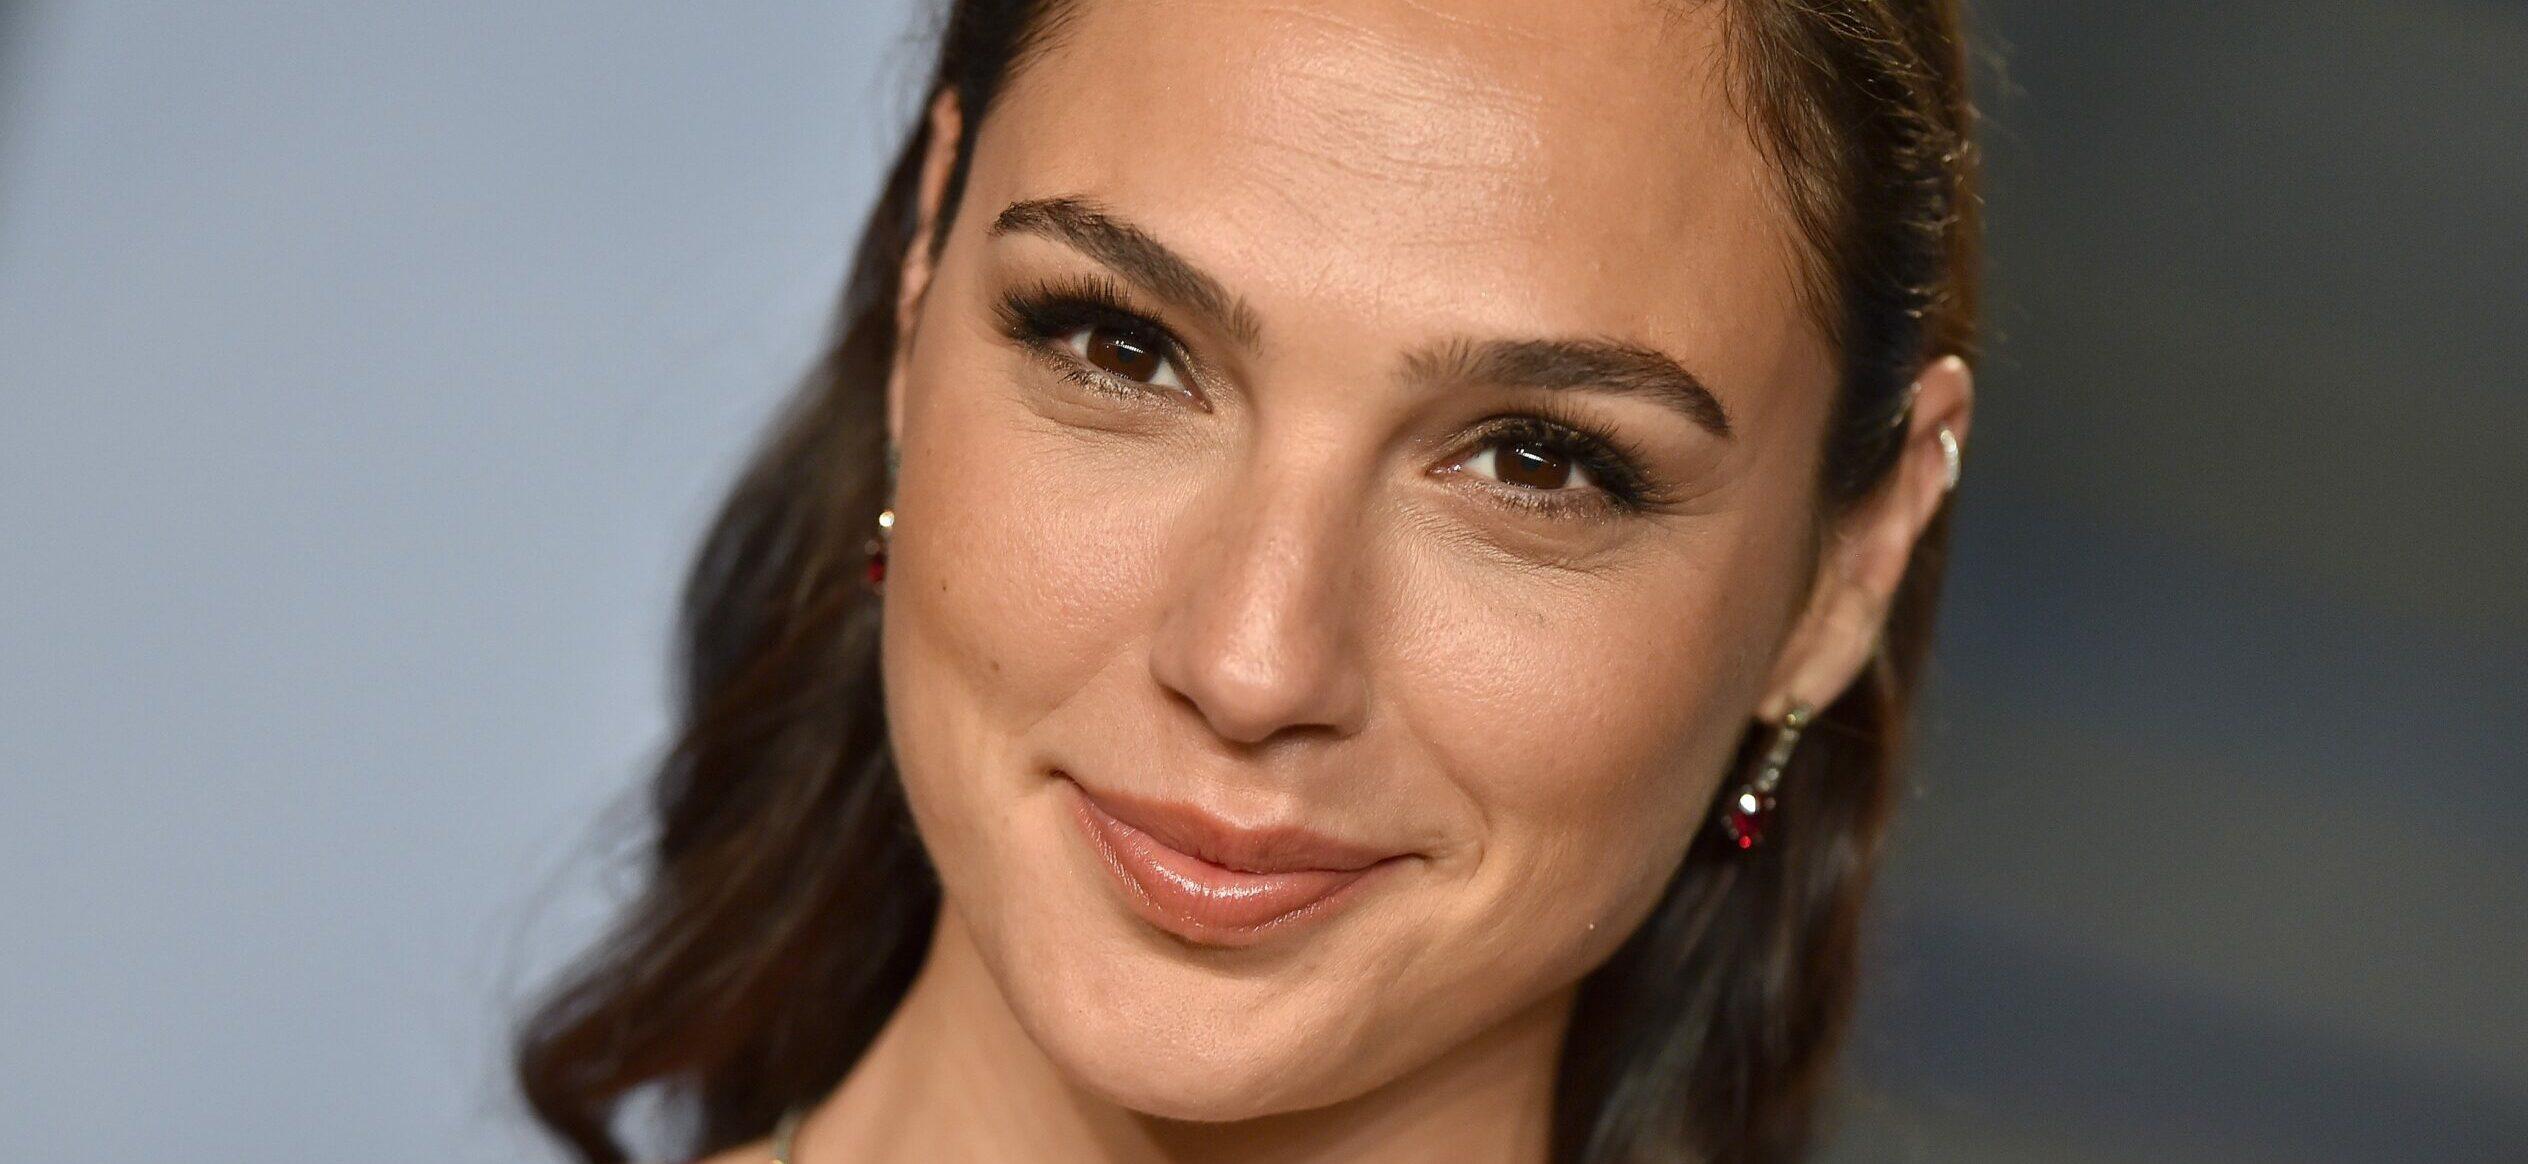 Gal Gadot Leaves Fans Wanting More With Seemingly Topless Snap